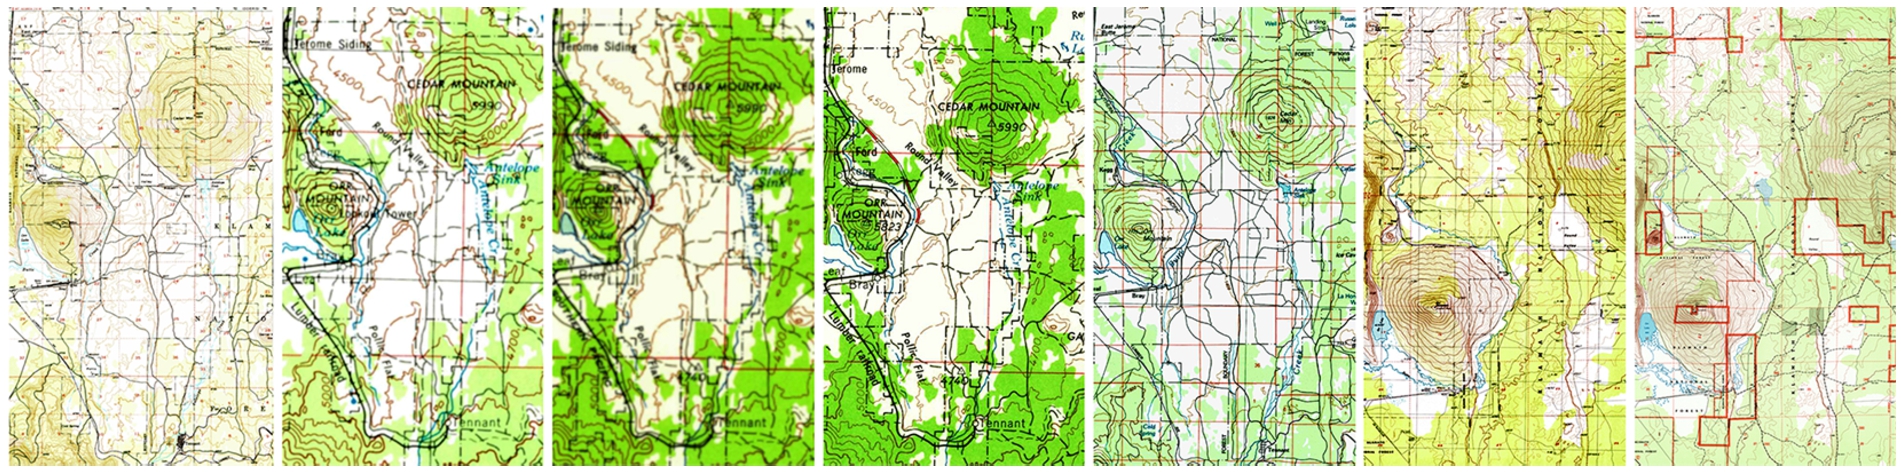 Historical maps of Bray, California from 1950, 1954, 1958, 1962, 1984, 1988 and 2001 (left to right, respectively).